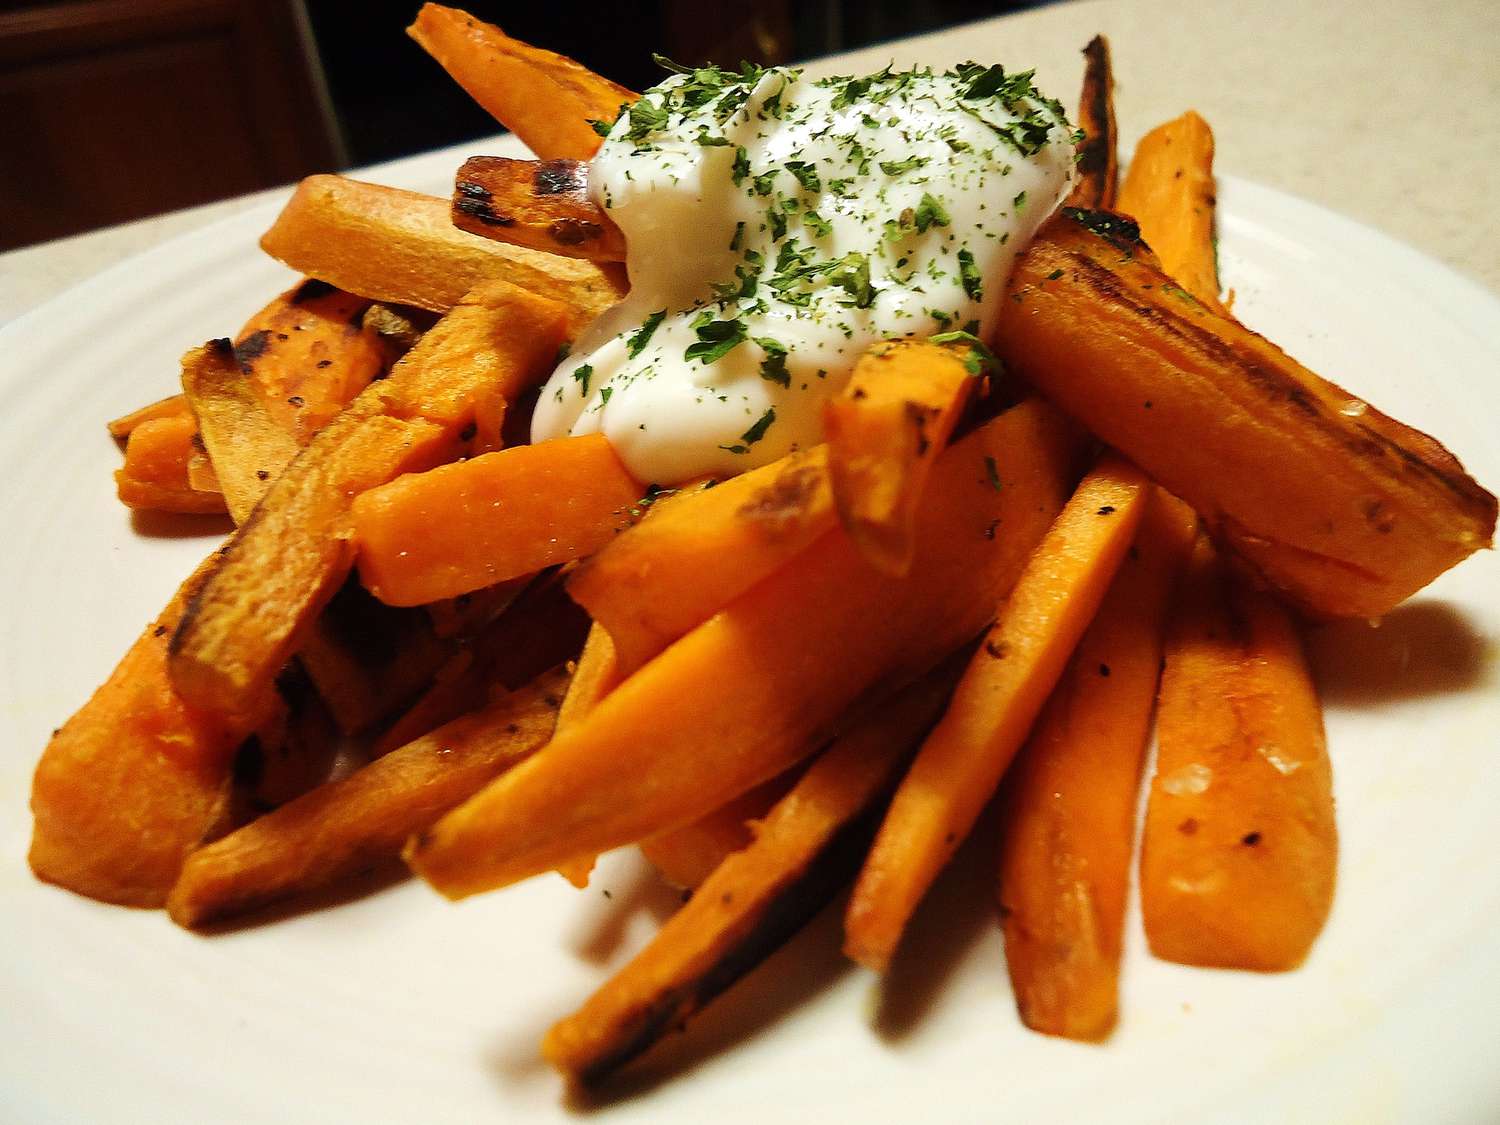 close up view of Fried Sweet Potatoes garnished with sauce and fresh herbs on a white plate